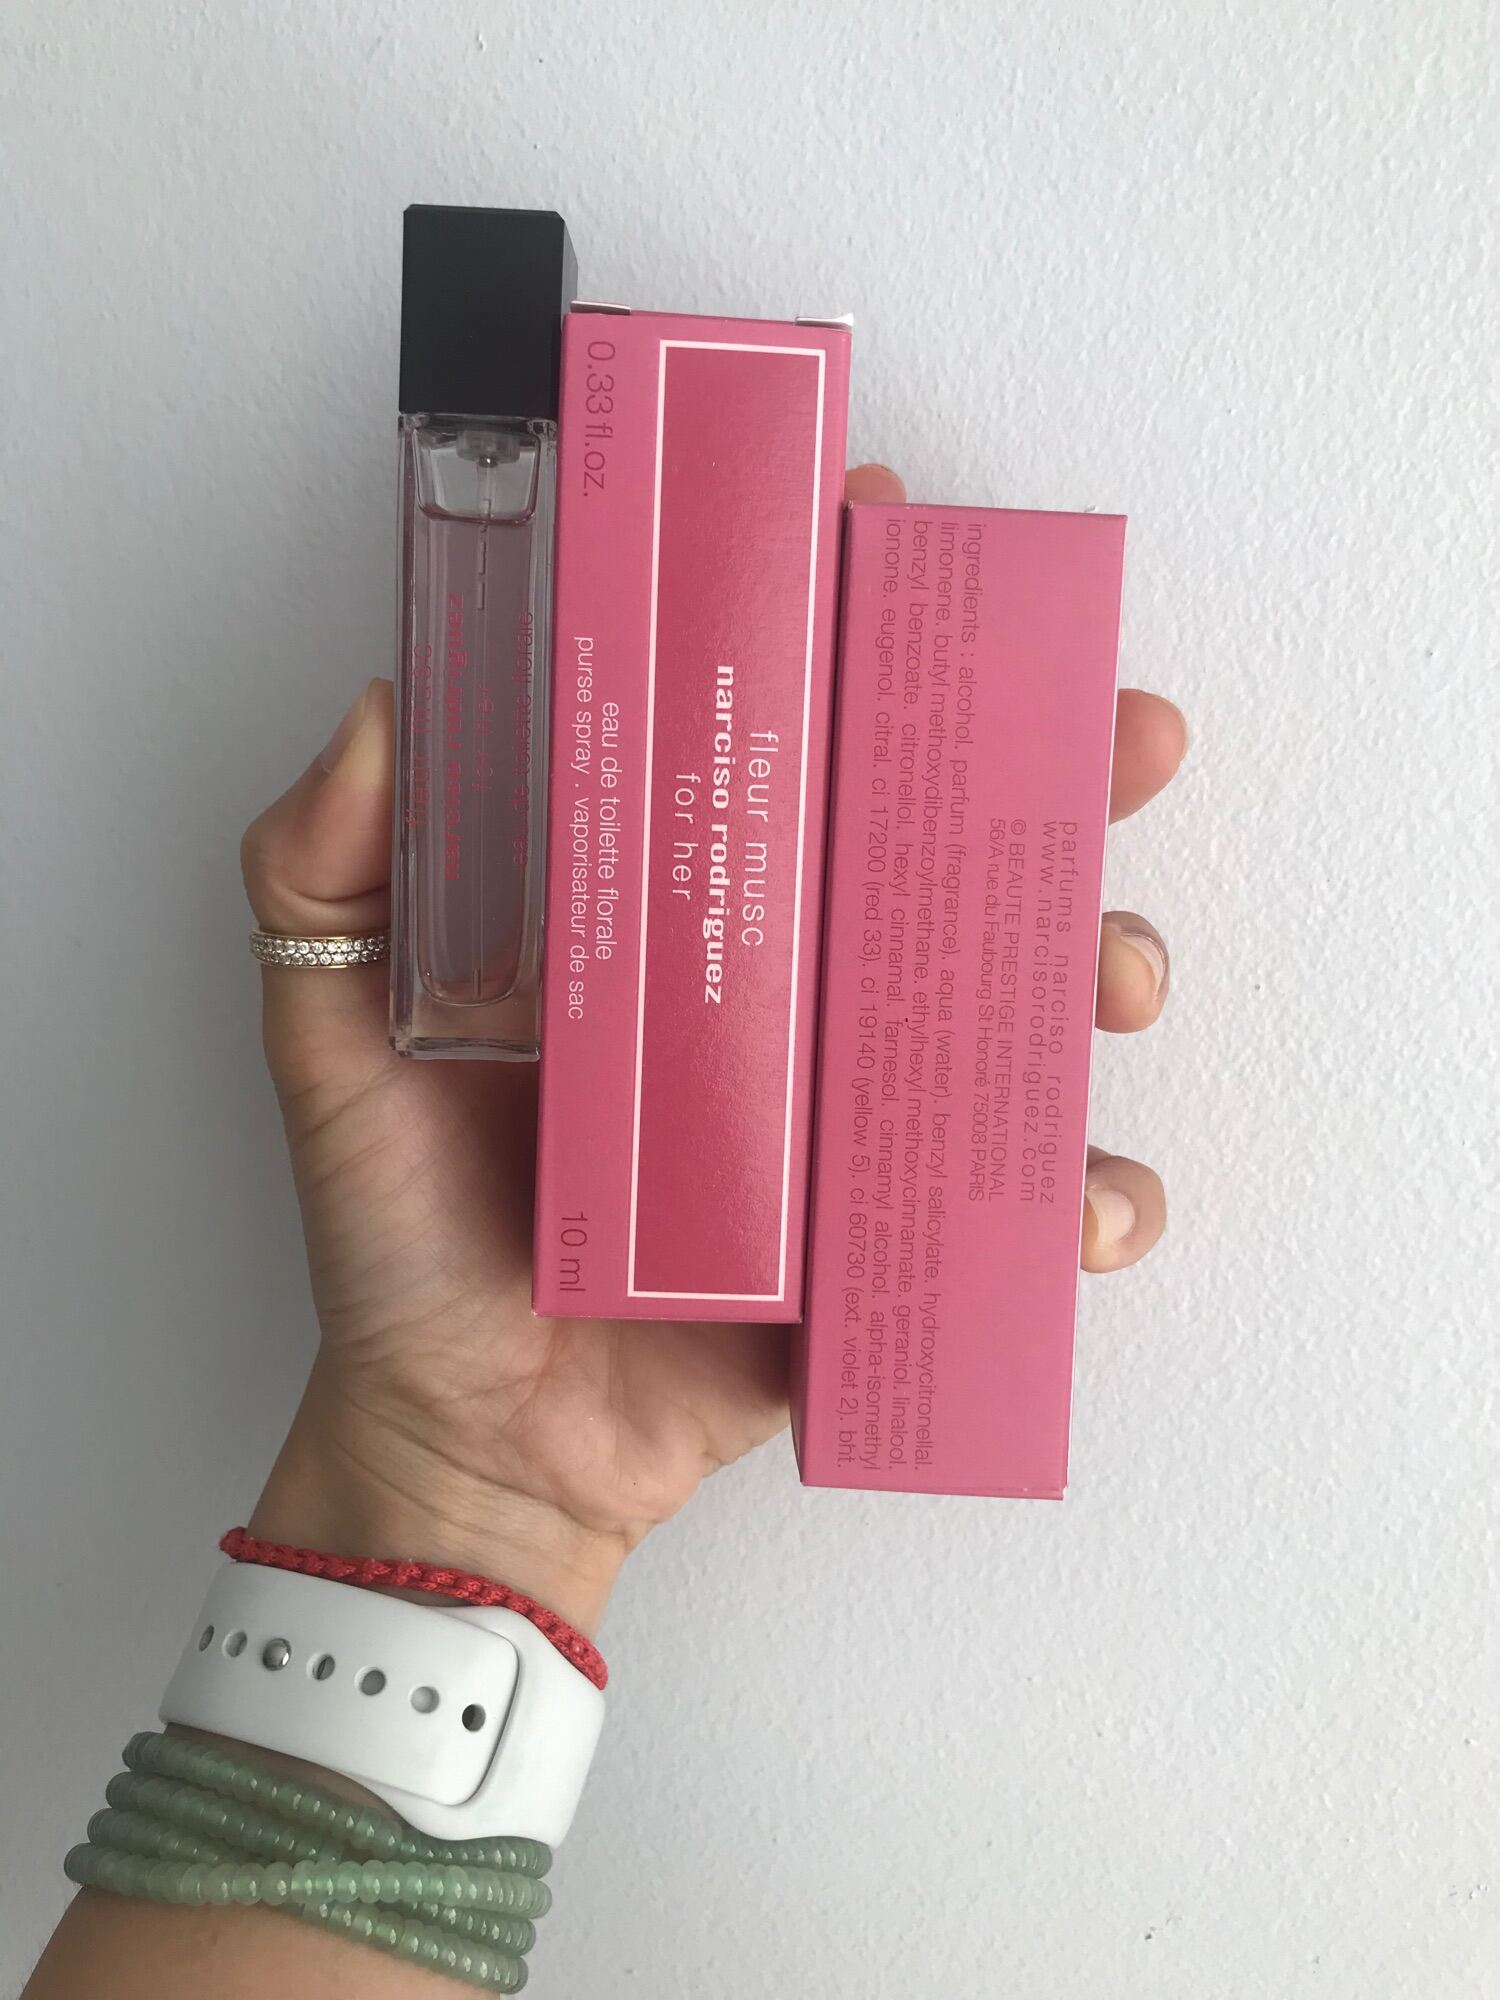 NARCISO RODRIGUEZ FLUER MUSC FOR HER -10Ml# Ở ĐÂY SHOP CHỈ BÁN HÁNG AUTHENTIC#